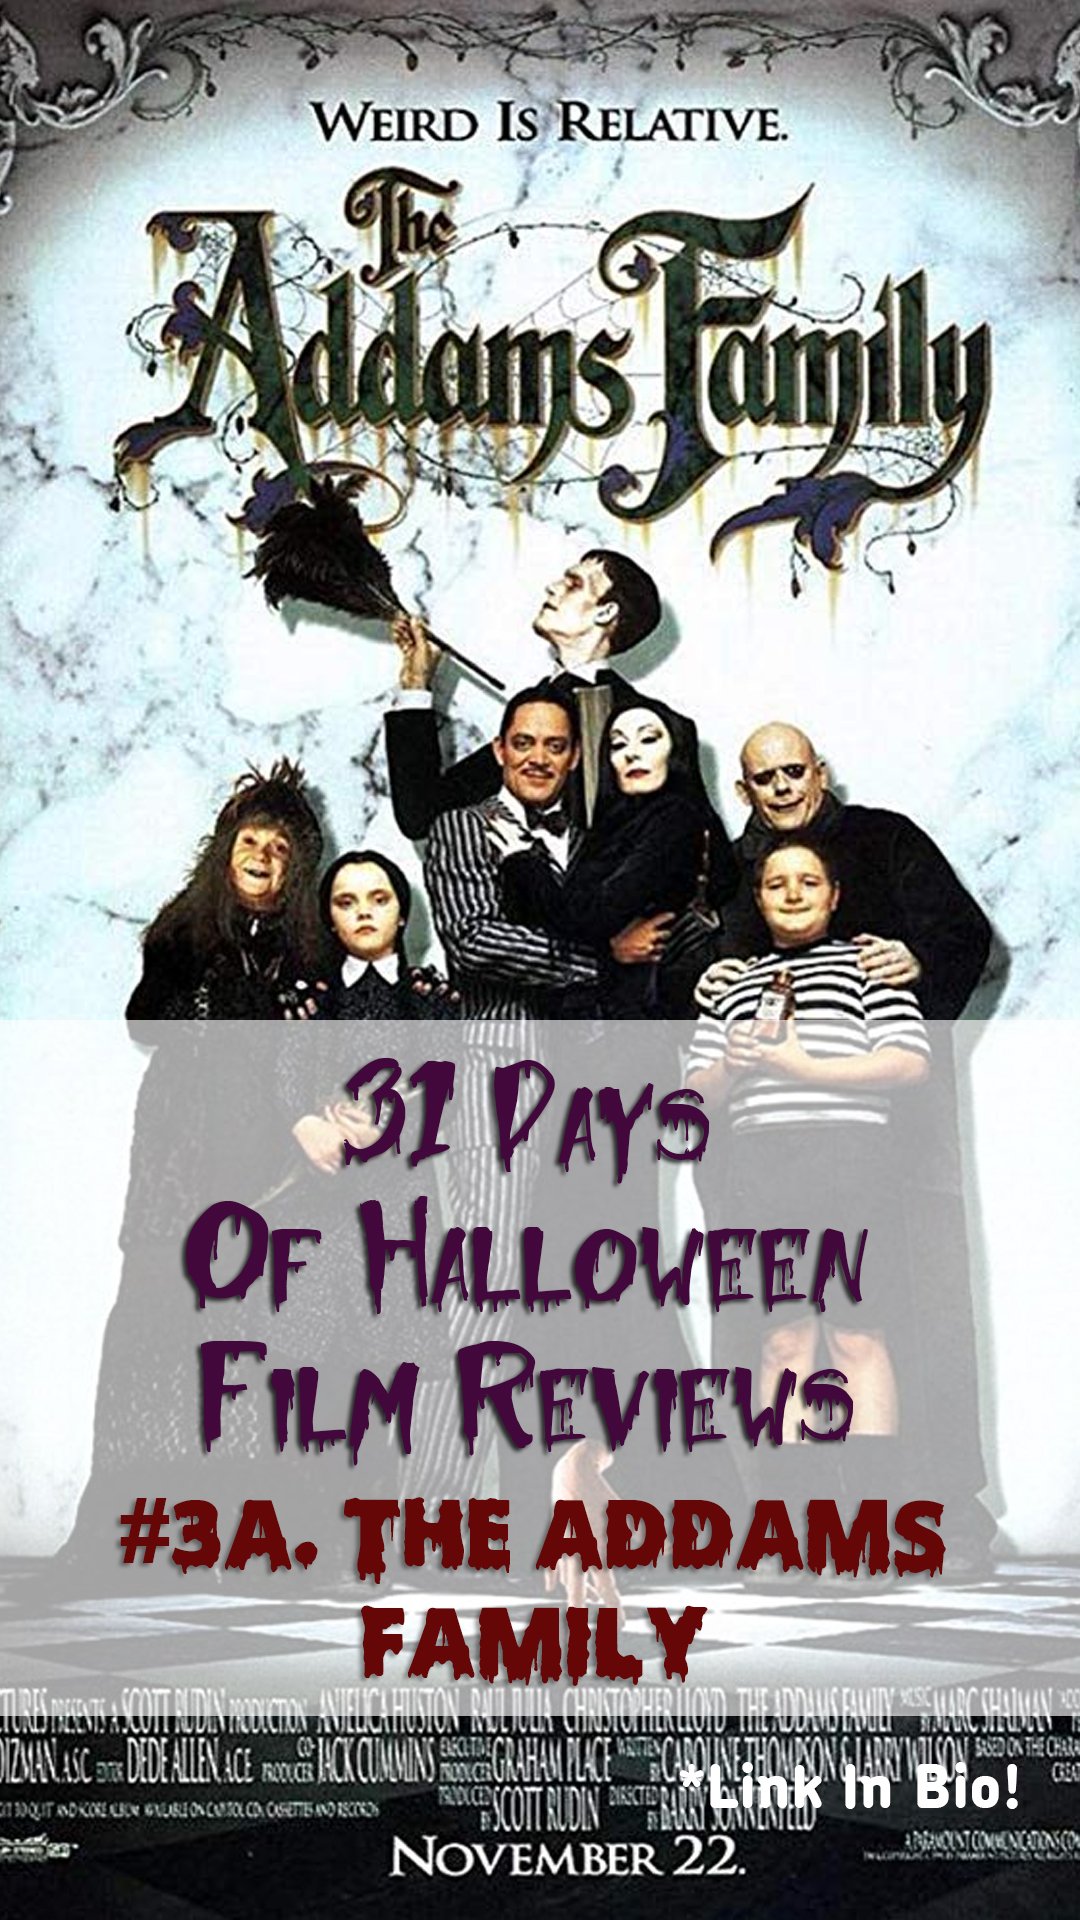 The Addams Family Film Review